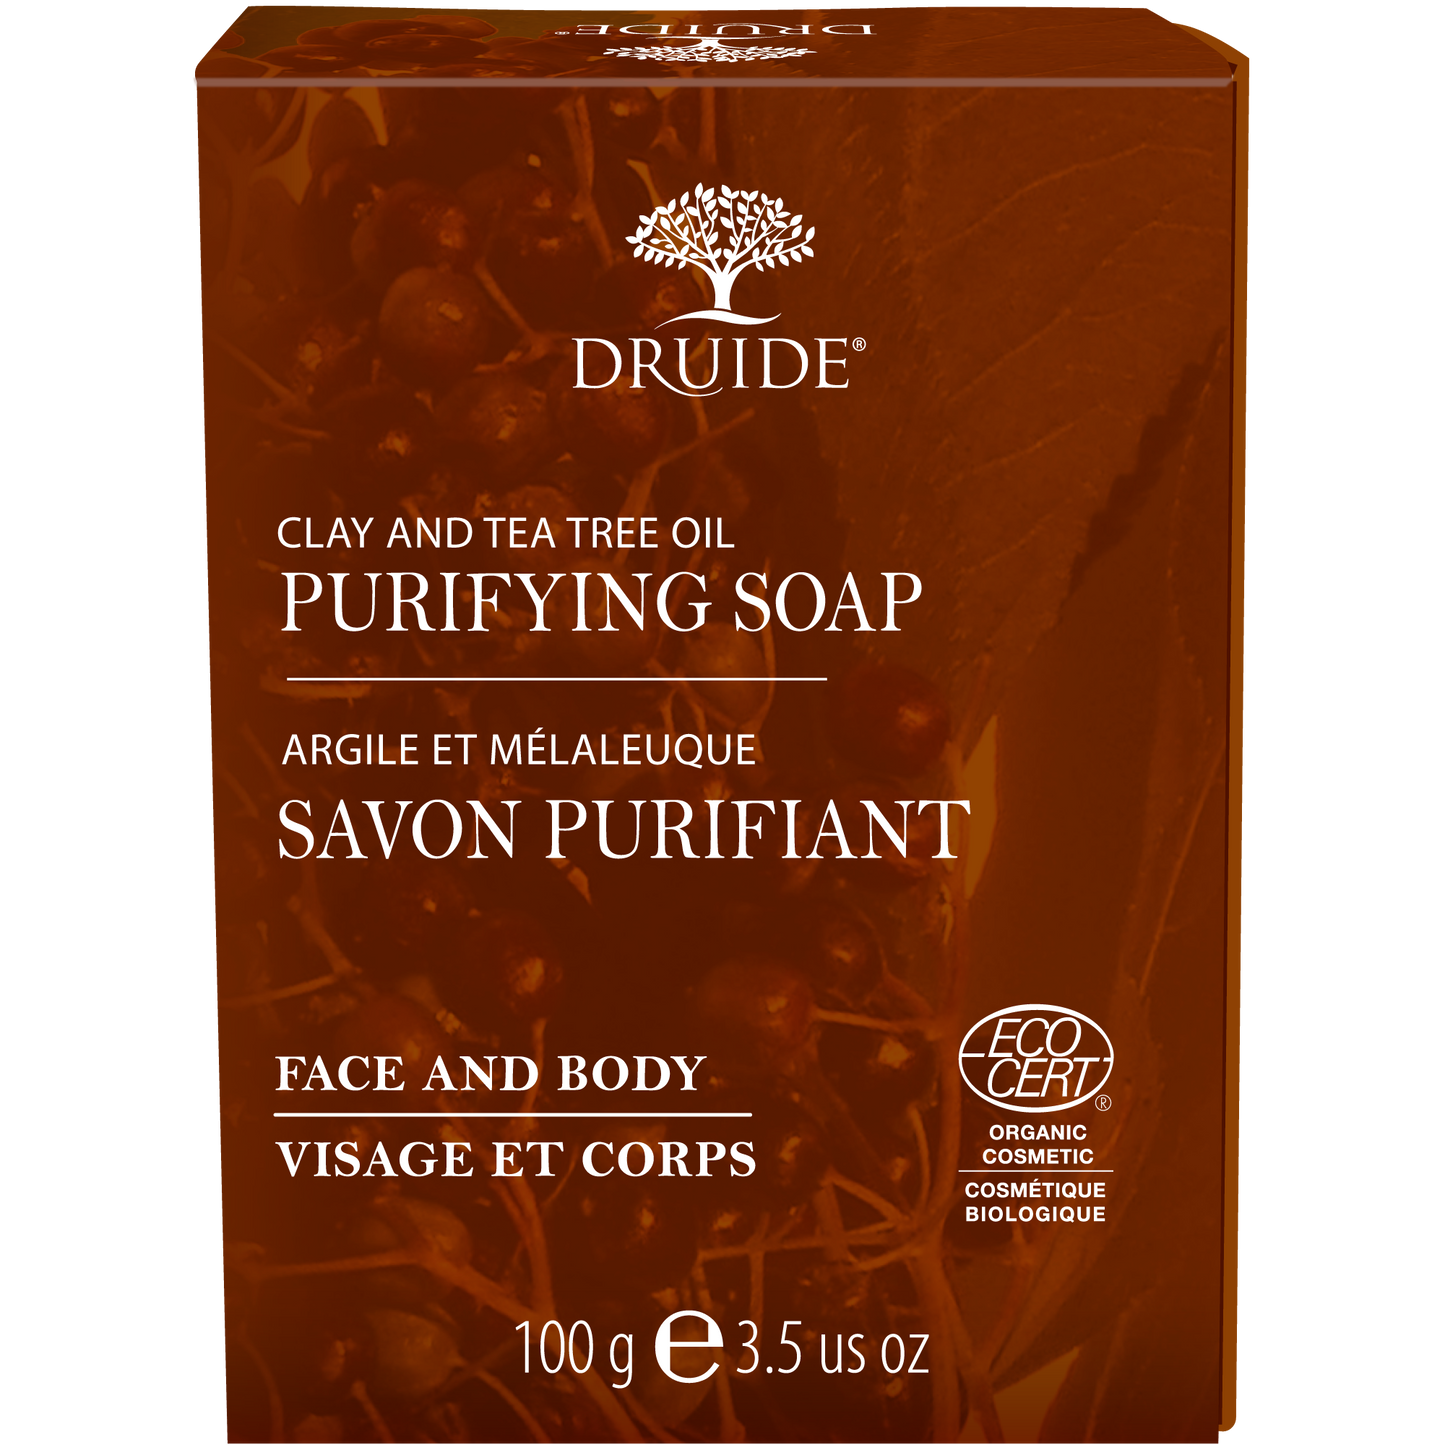 A brick coloured box of Druide brand Purifyiing soap with clay and tea tree oil